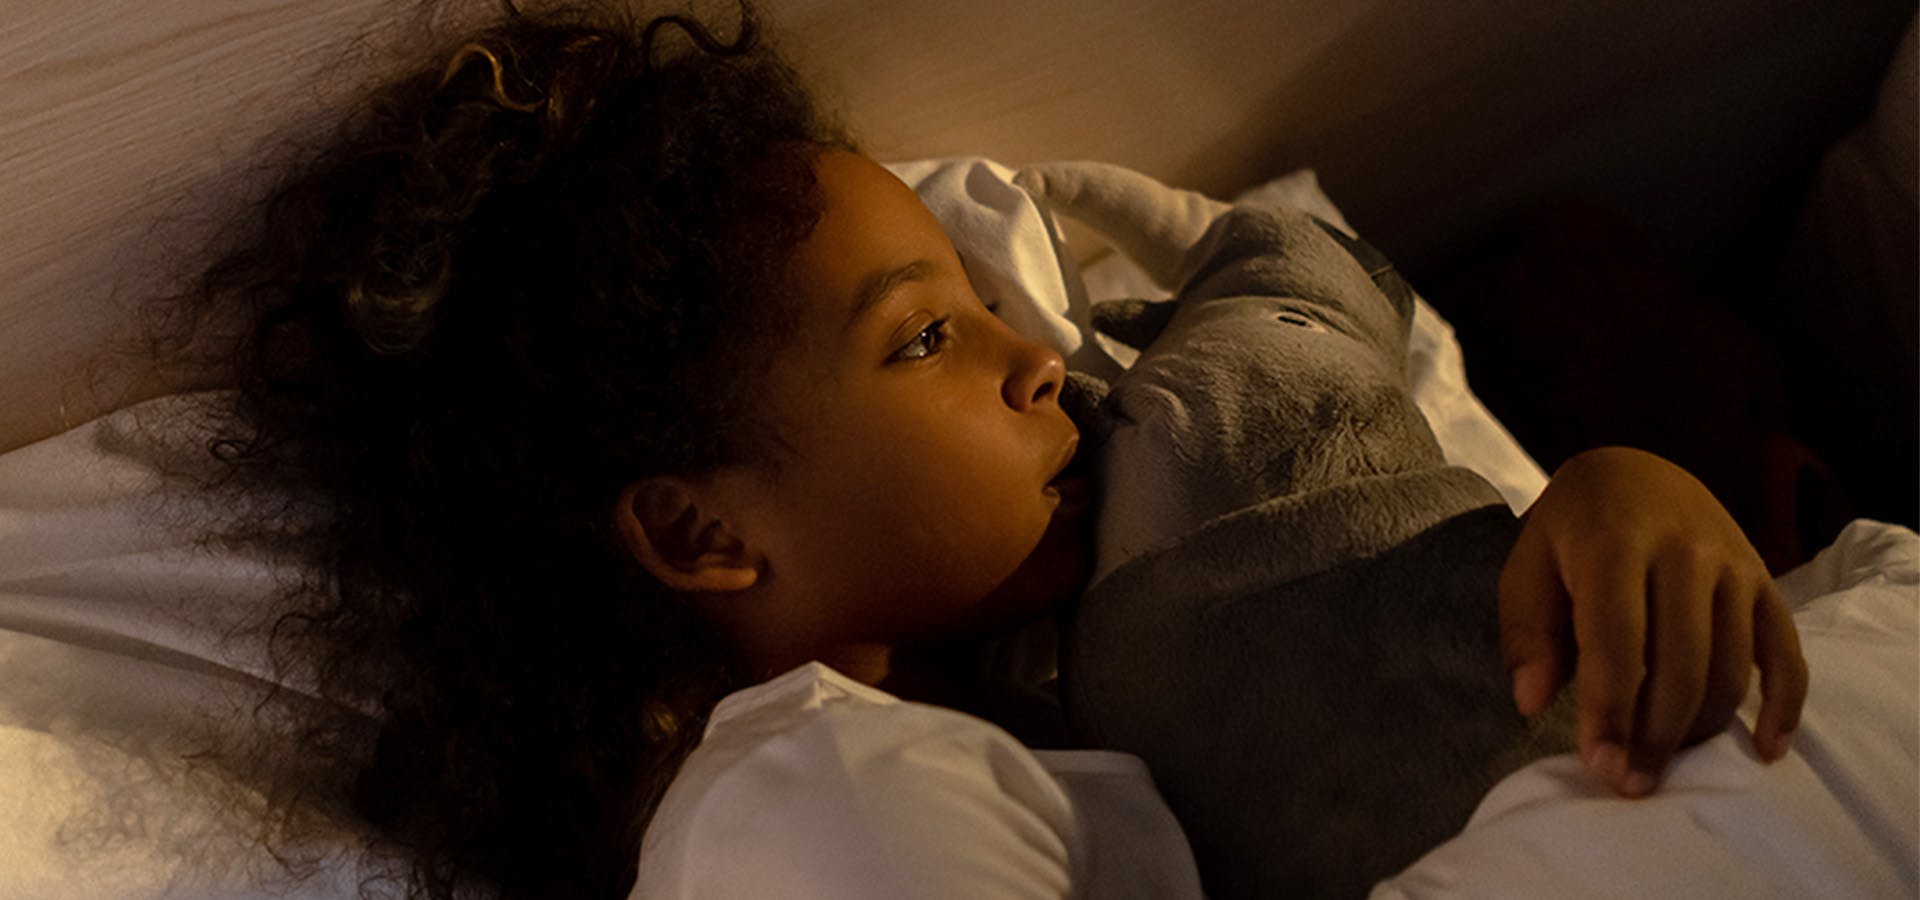 Close-up of young girl in bed at night holding stuffed animal and looking away